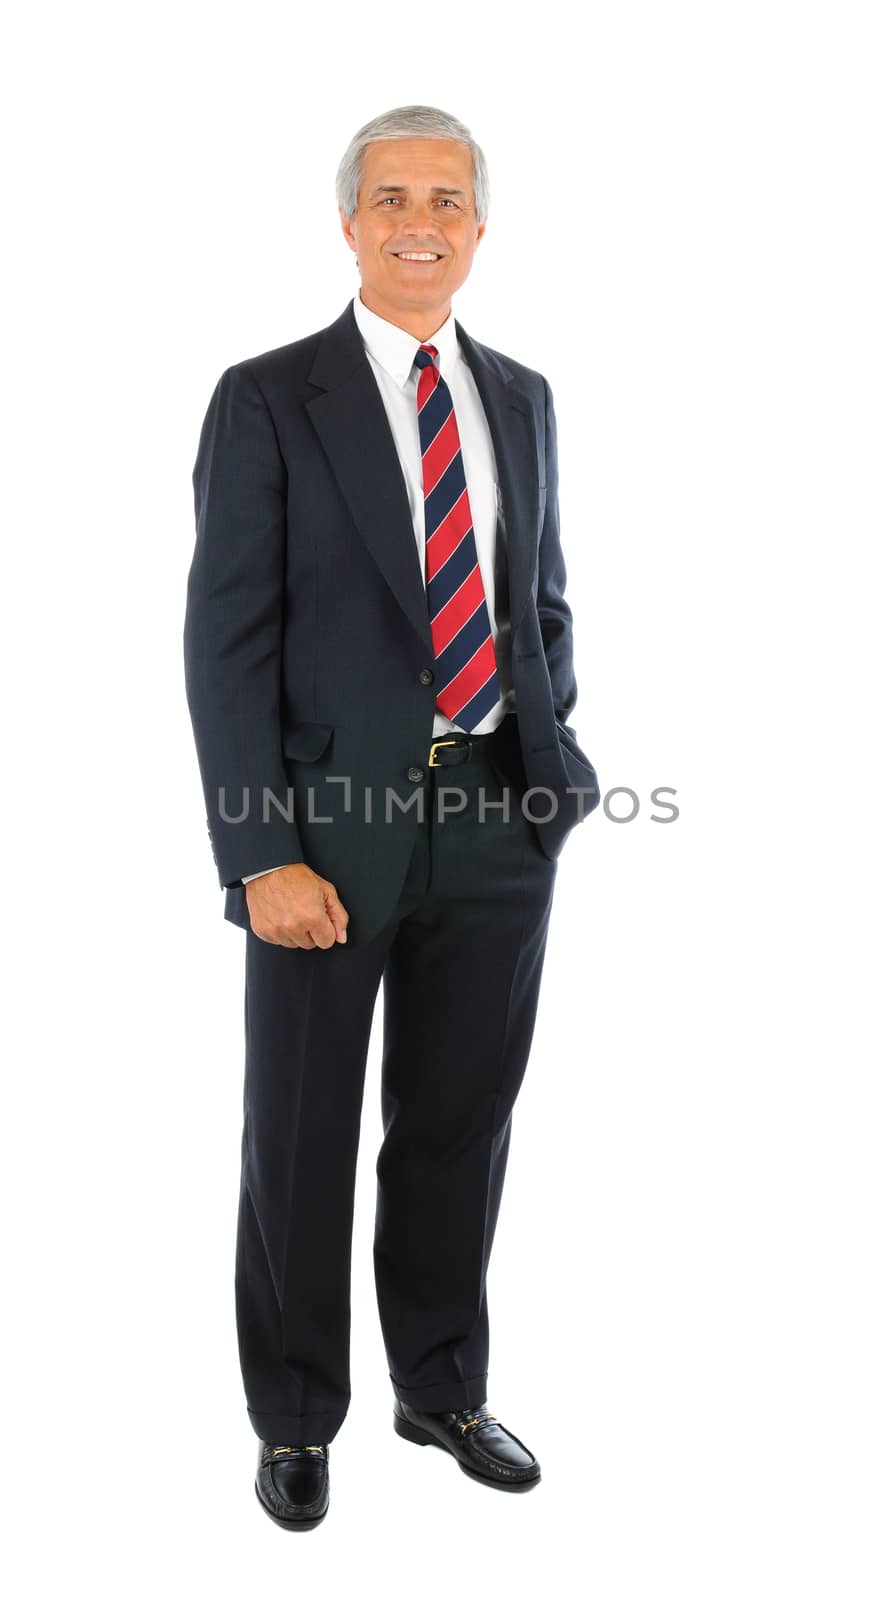 Smiling middle aged businessman in a suit and tie standing with one hand in his pocket and the other buy his side. Full length over a white background.